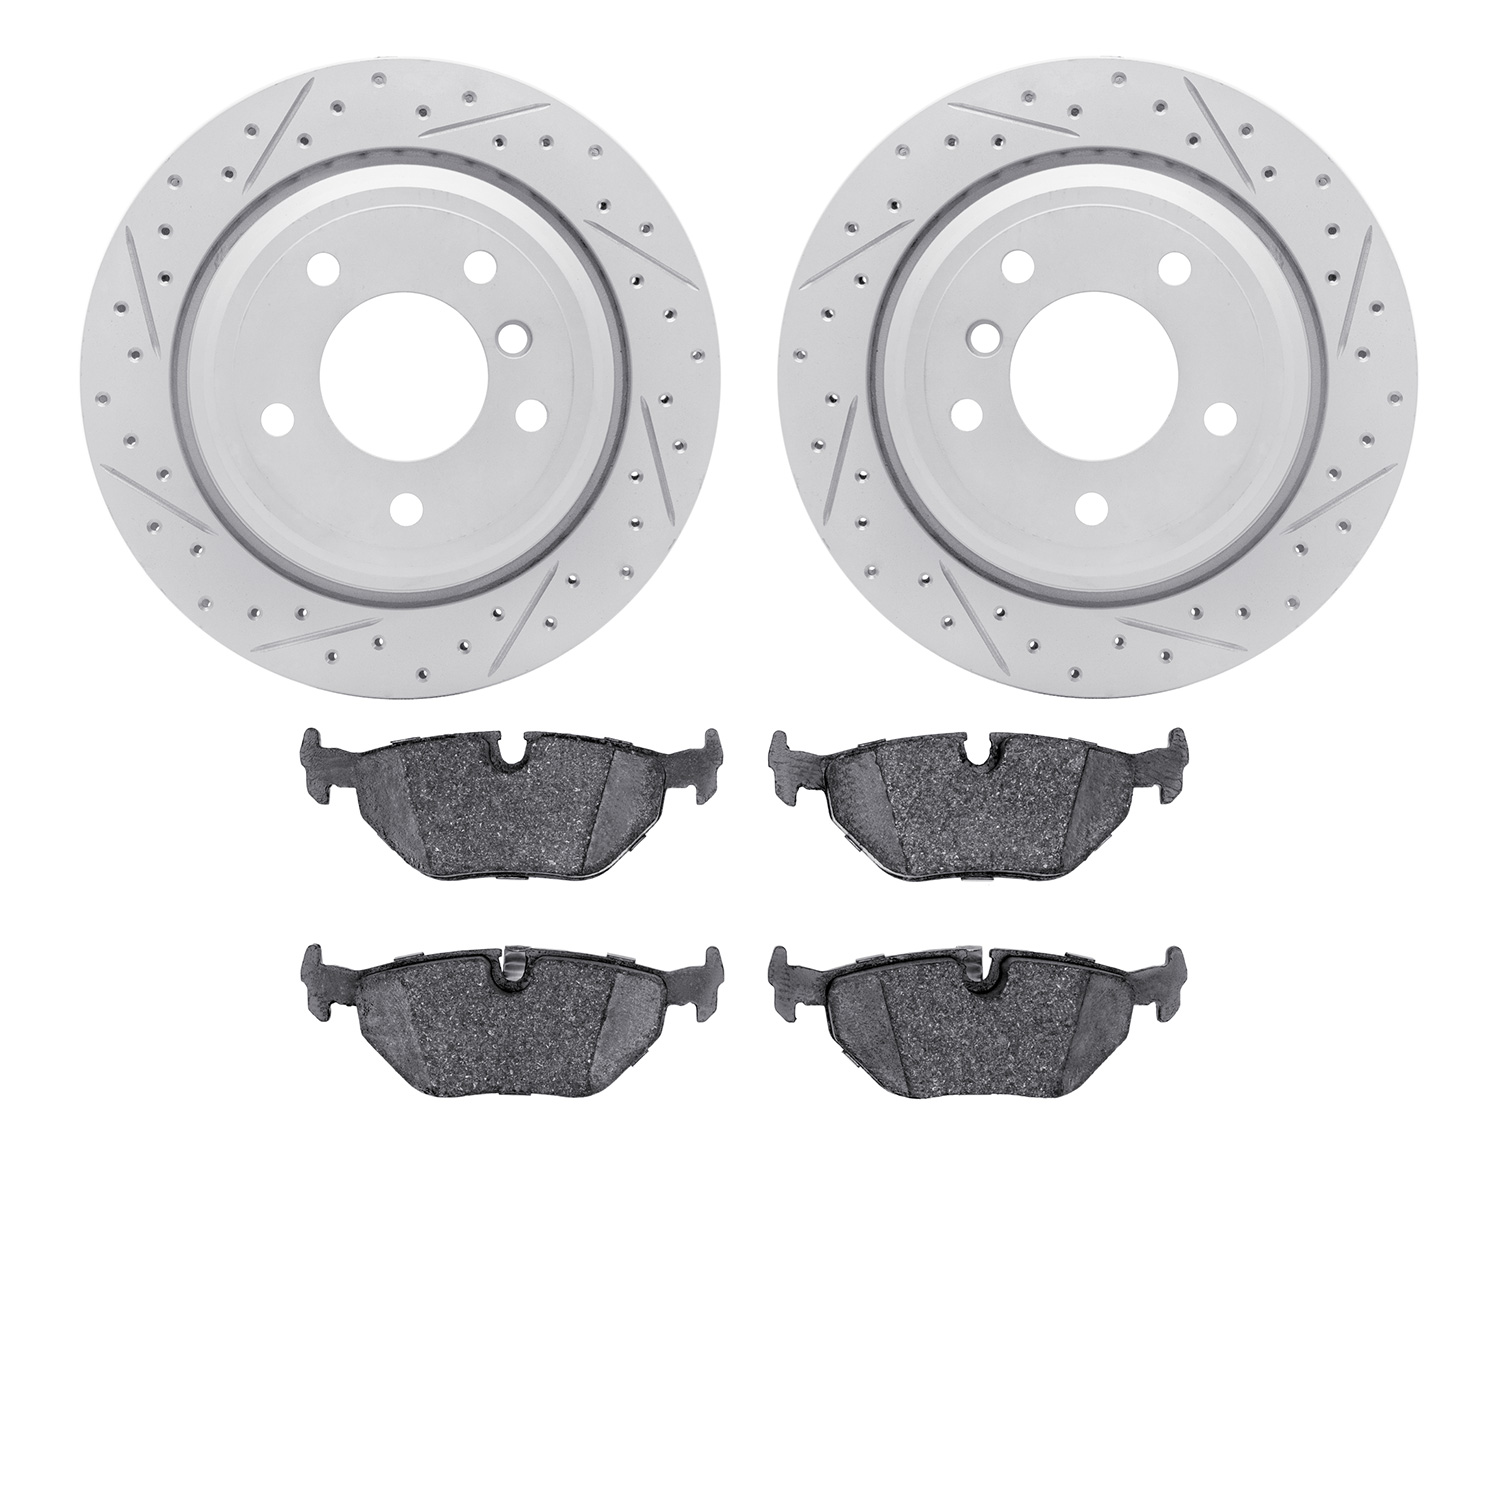 2602-31051 Geoperformance Drilled/Slotted Rotors w/5000 Euro Ceramic Brake Pads Kit, 1996-2003 BMW, Position: Rear